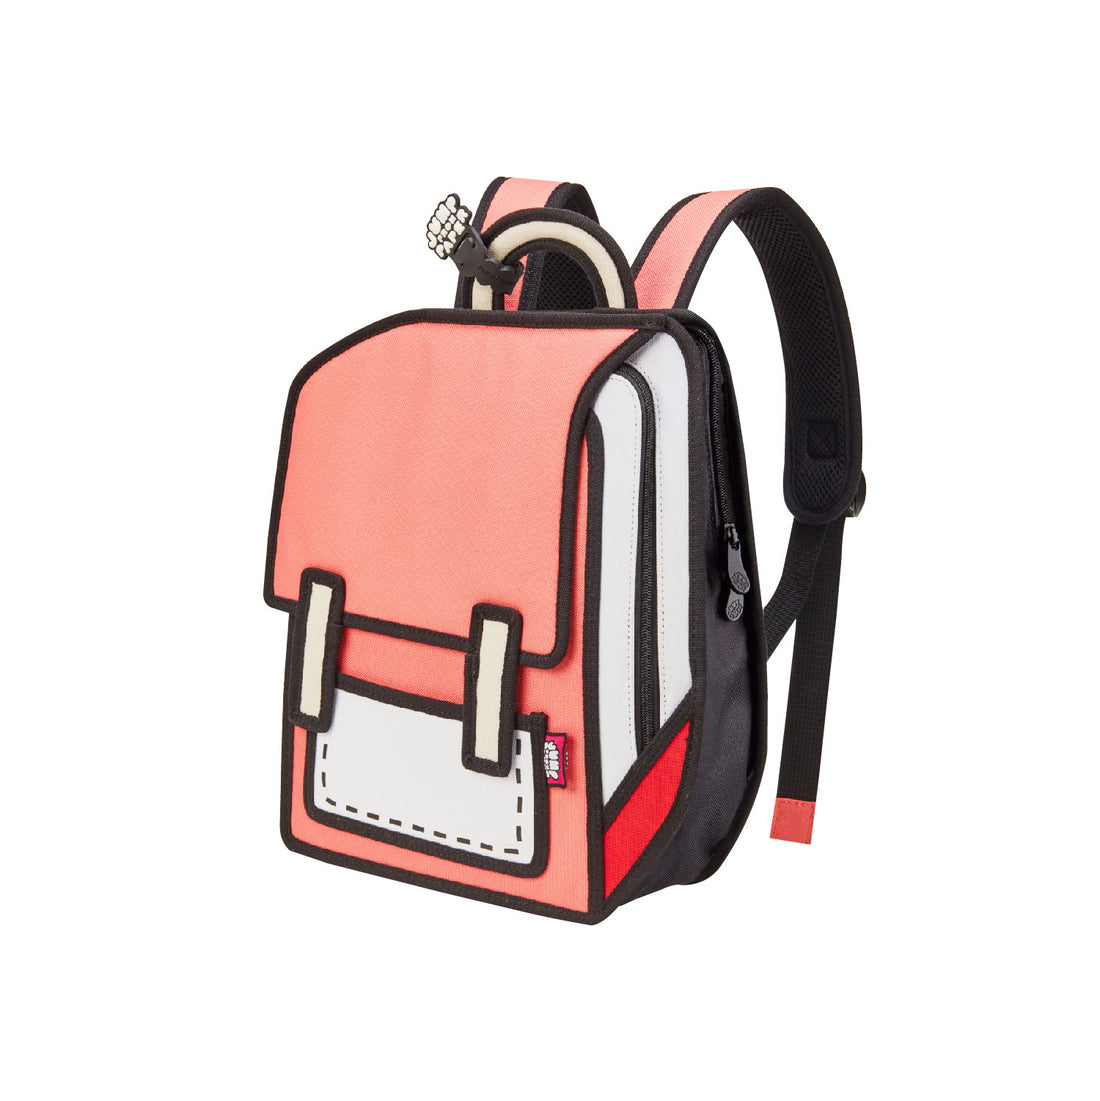 Junior Watermelon Red Spaceman Backpack - JumpFromPaper